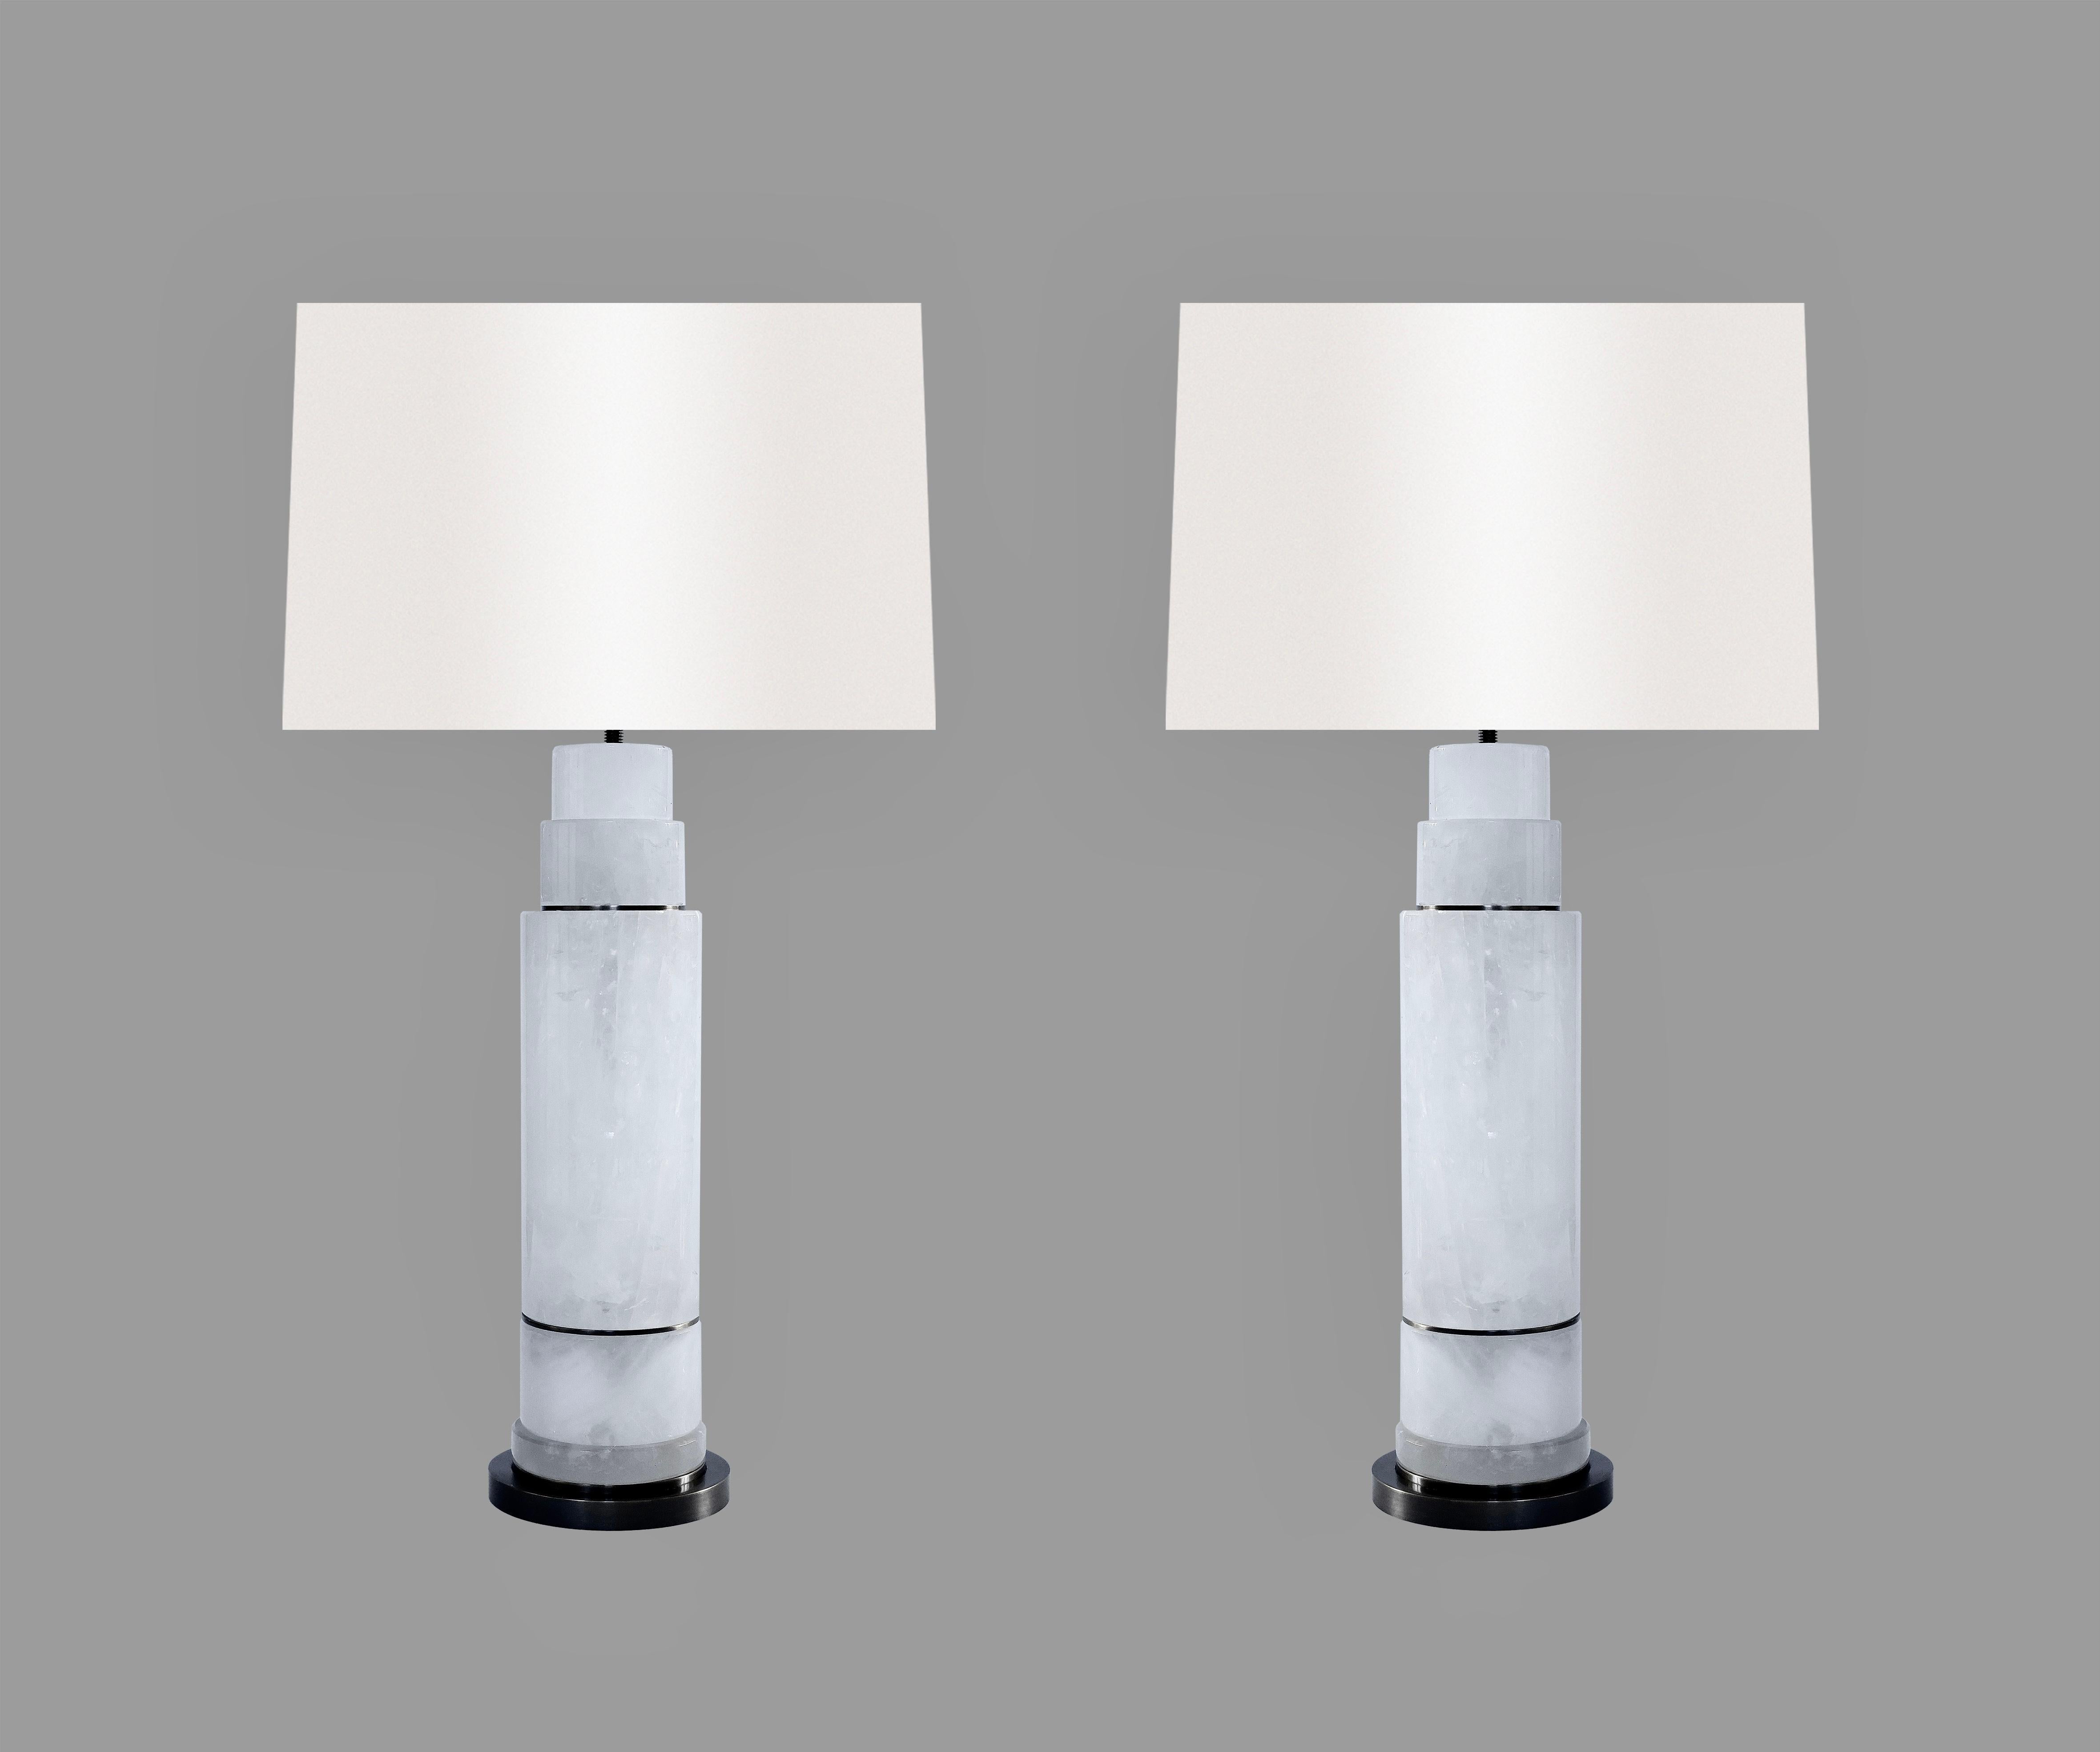 Pair of sectional column rock crystal lamps with aged brass inserts and bases. Created by Phoenix Gallery, NYC.
To the top of rock crystal: 14.75”
(Lampshade not included.)